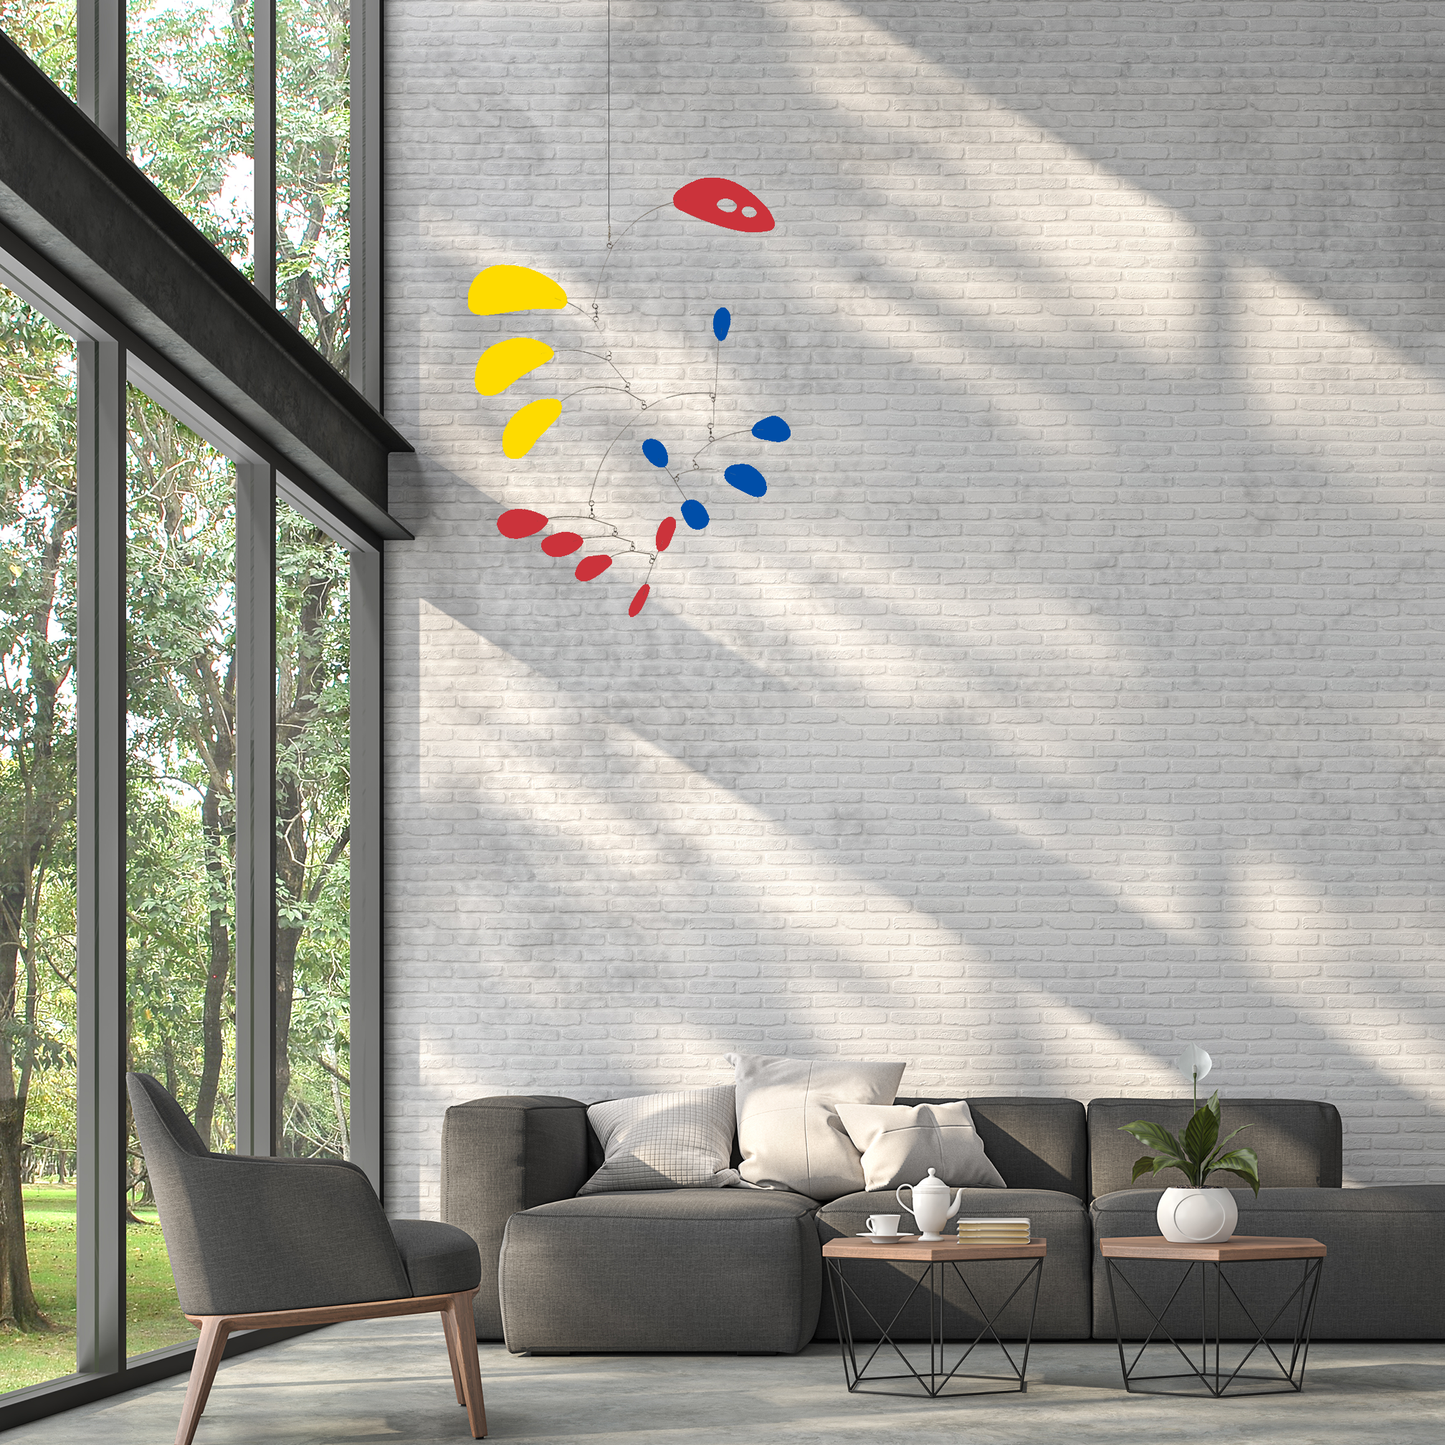 Gorgeous mid century modern CoolCat kinetic art mobile sculpture in Red, Blue, and Yellow, hanging in gray living room with tall ceiling by AtomicMobiles.com